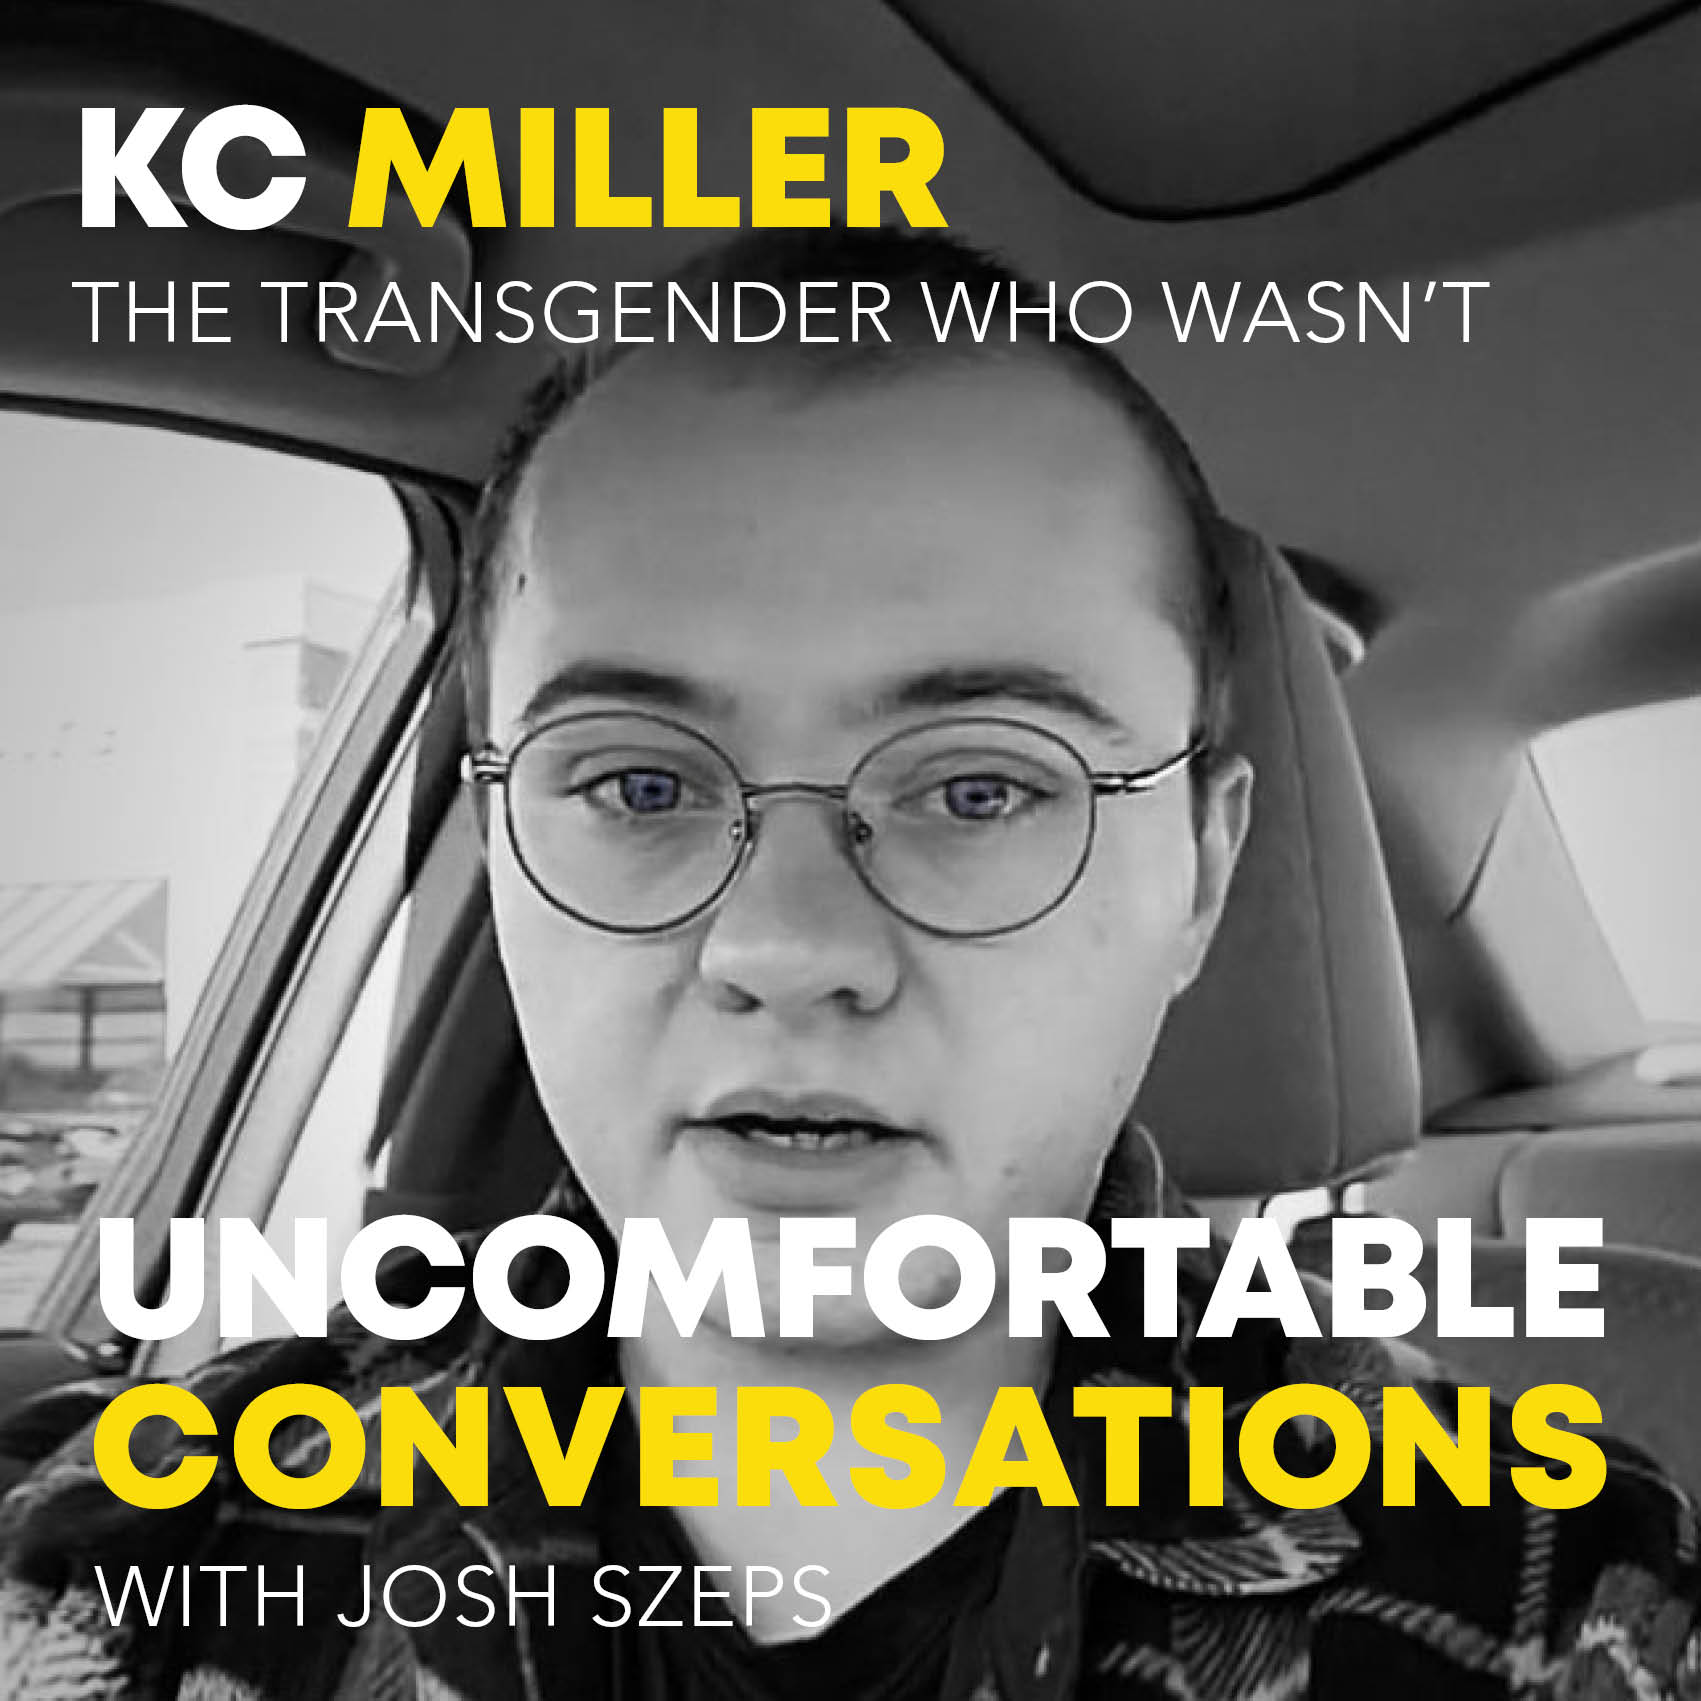 "The Transgender Who Wasn't" with KC Miller